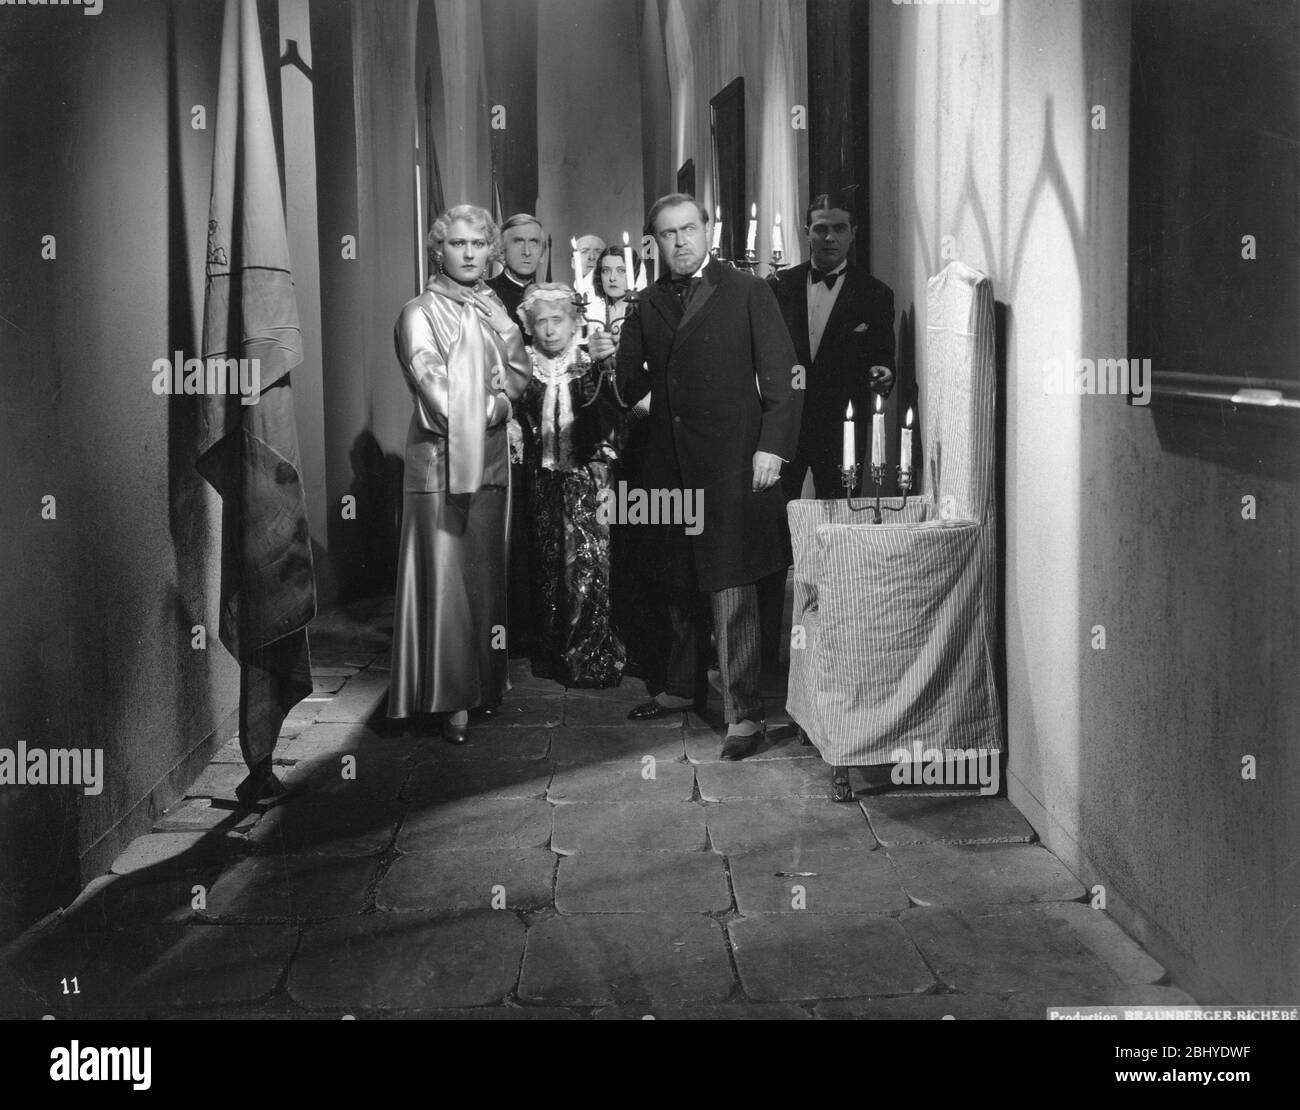 Fantomas Year: 1932 - France Director: Pál Fejös Tania Fedor, Maurice Schutz,  Marie-Laure, Anielka Elter, Roger Karl, Georges Rigaud Stock Photo - Alamy